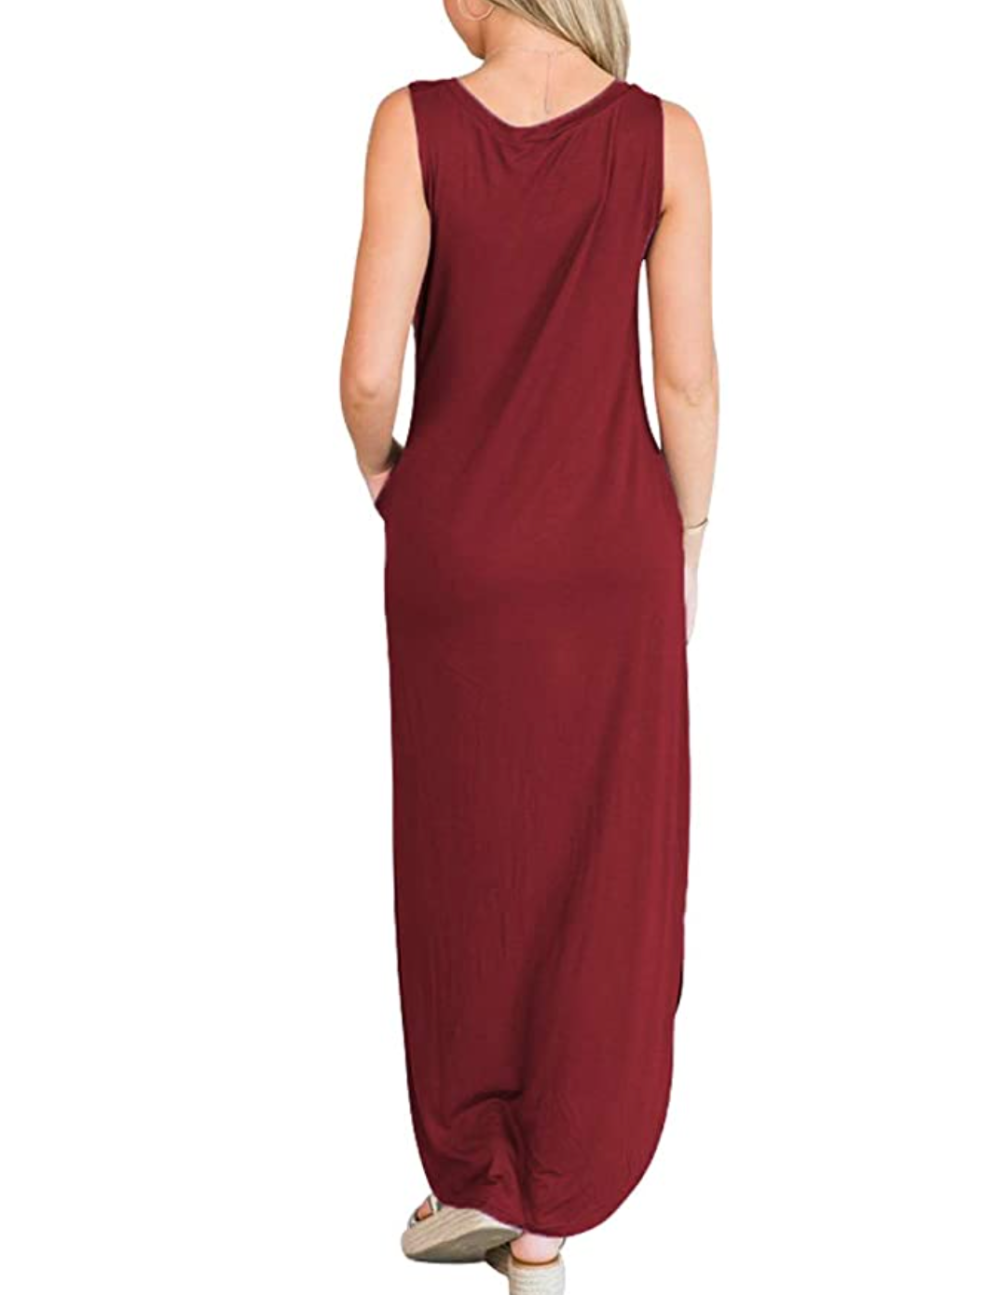 ANRABESS Women's Casual Loose Maxi Dress